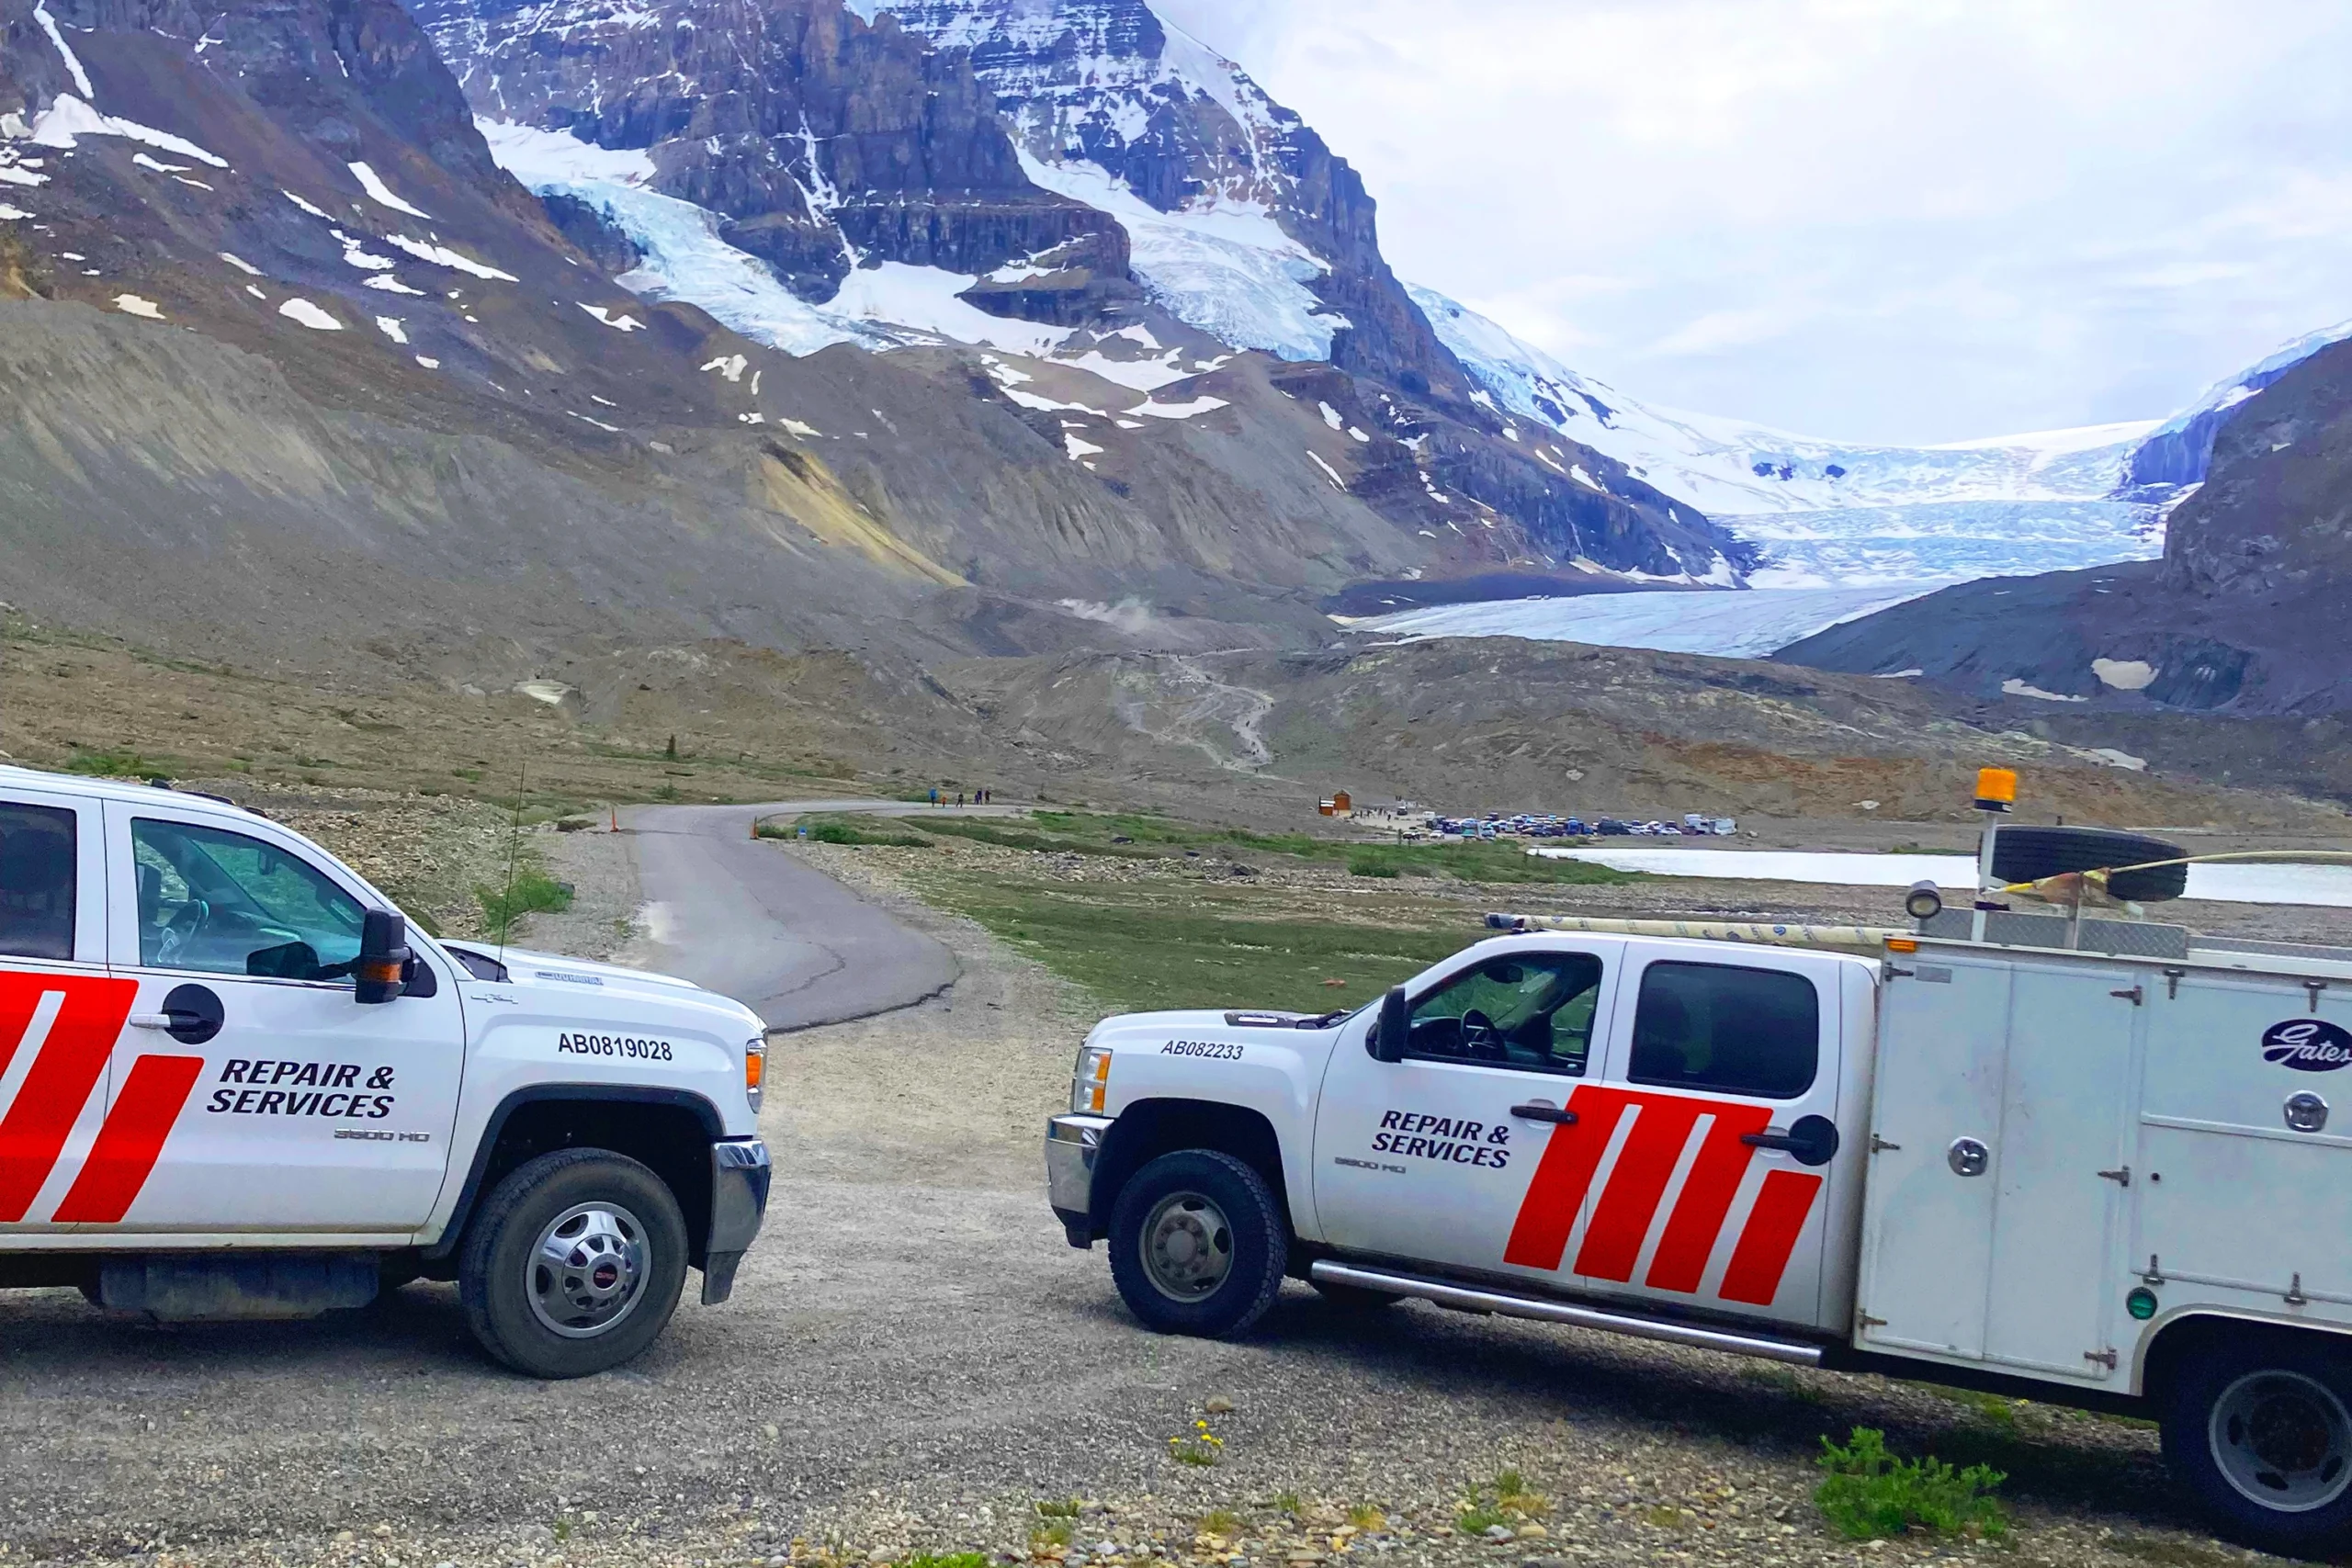 Two white Motion Repair & Services trucks at mountain location